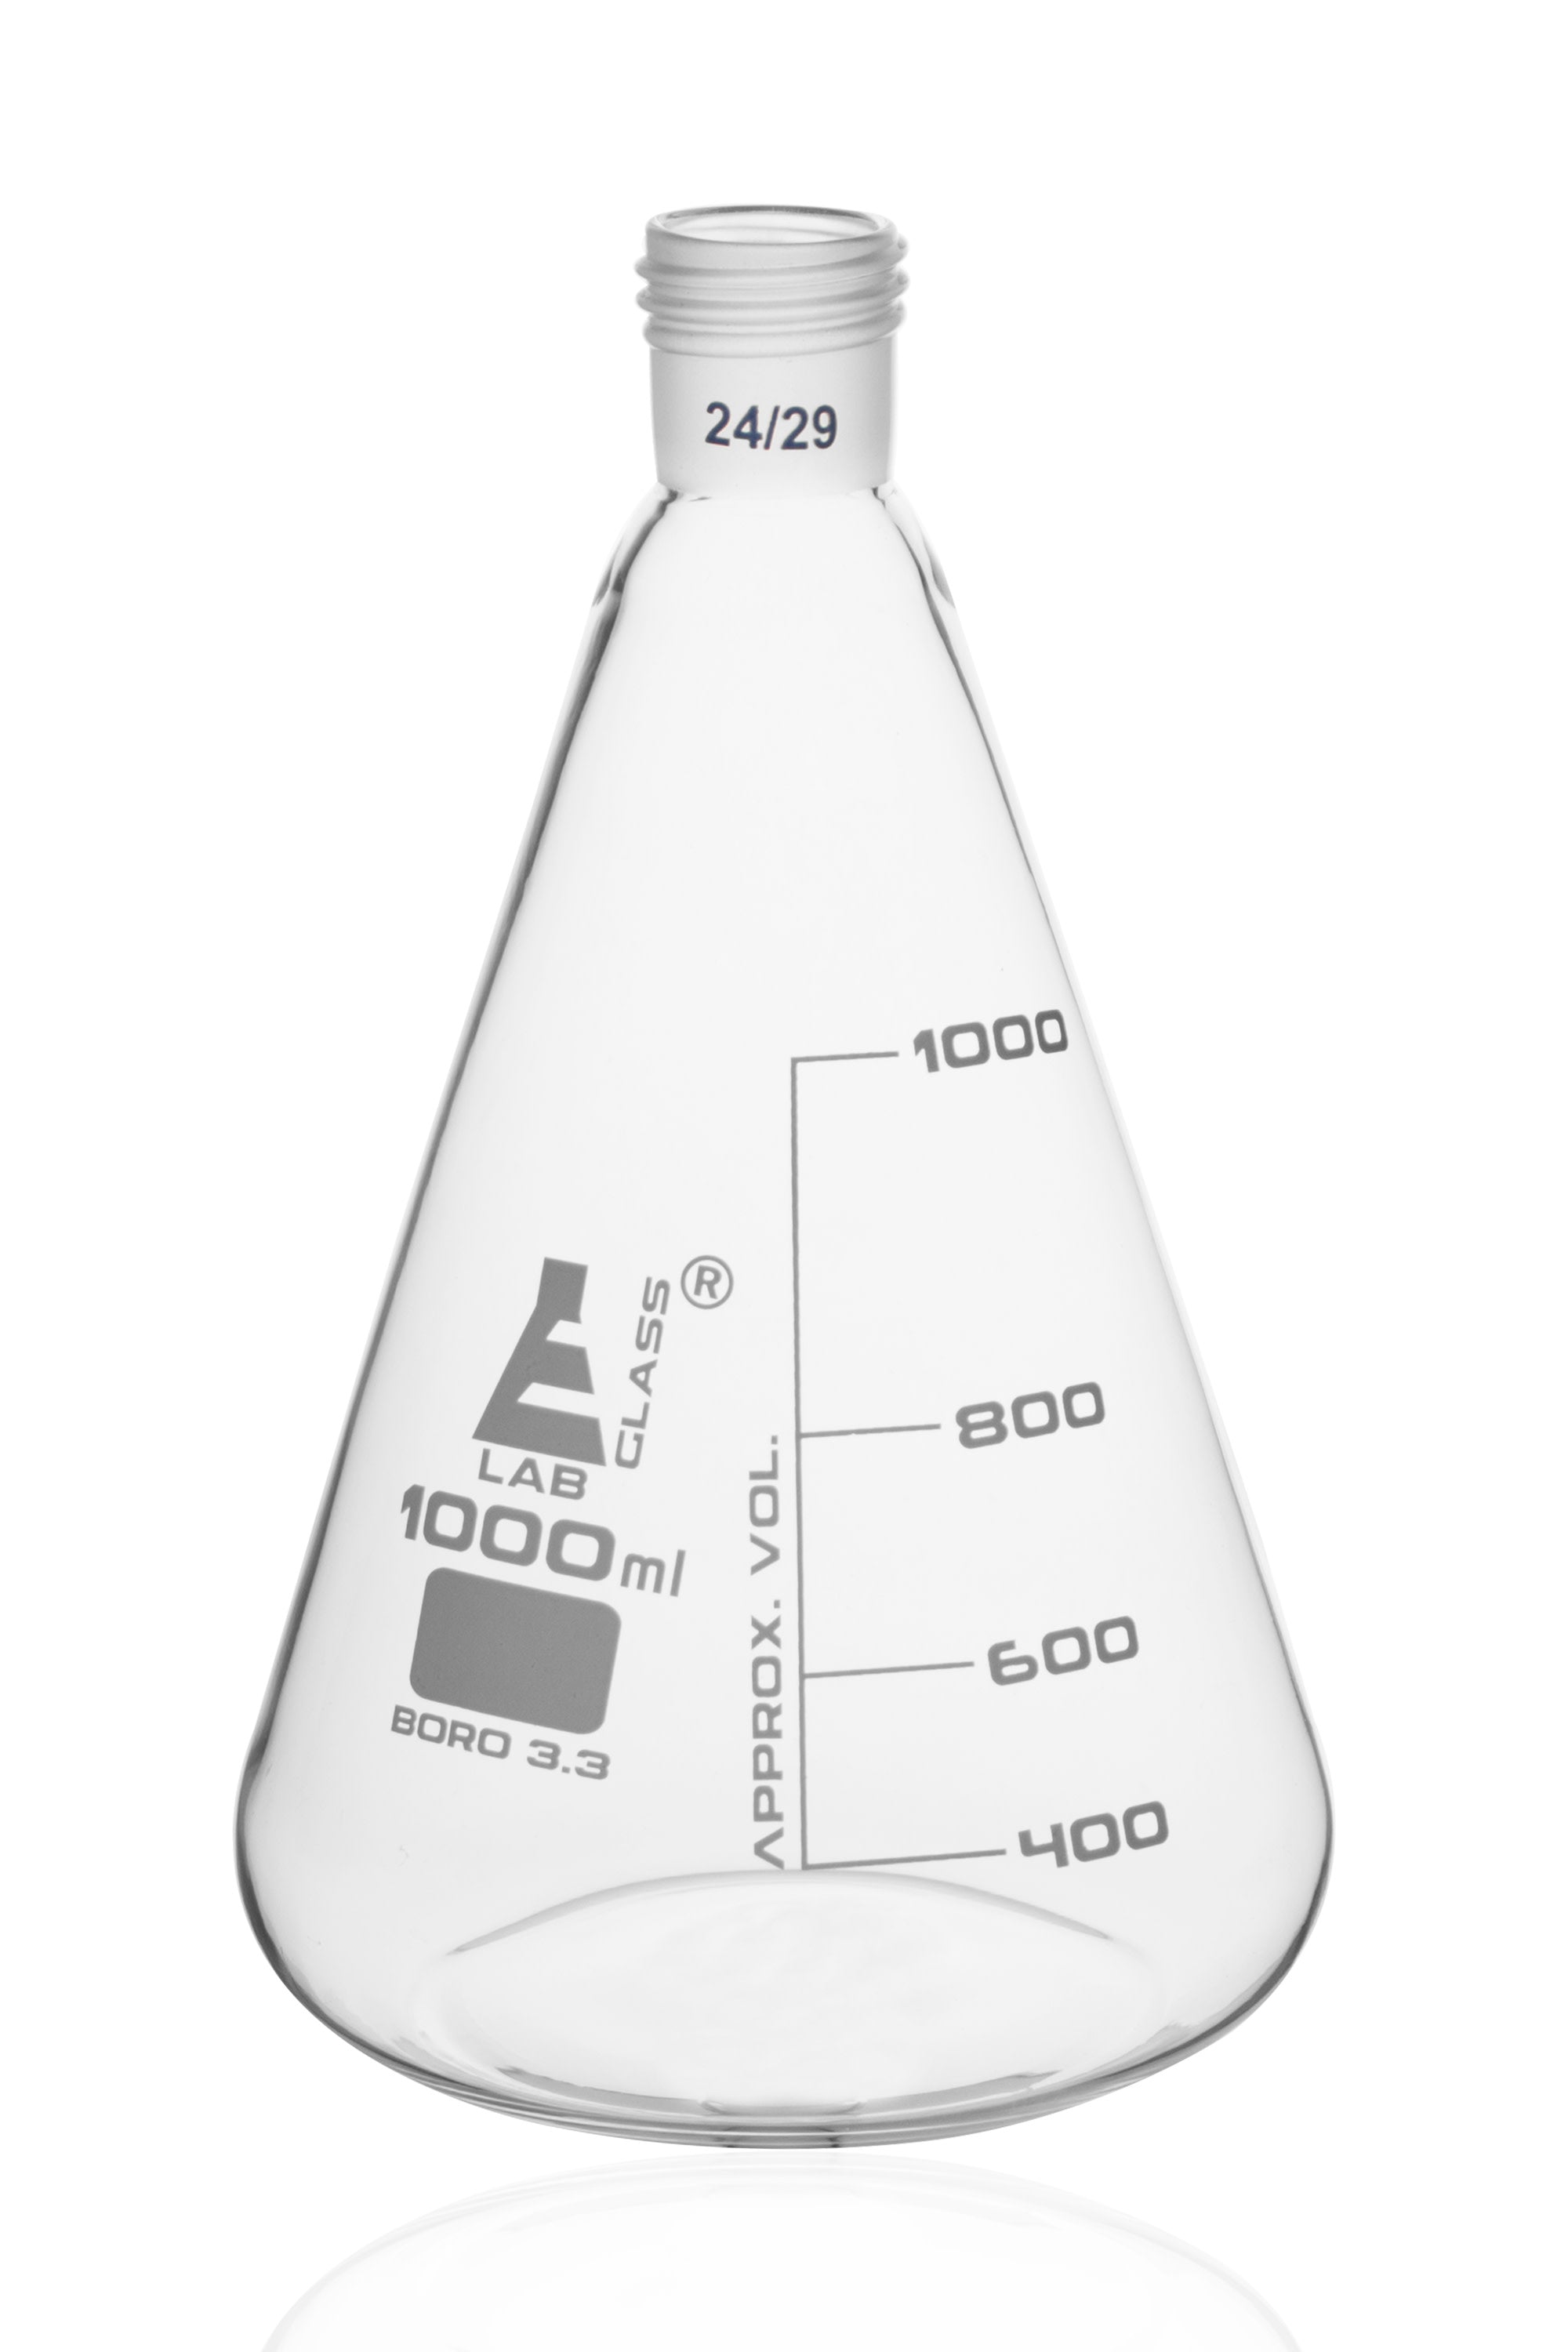 Borosilicate Glass Erlenmeyer Flask with 24/29 Screw Thread Neck Joint, 1000 ml, 200 ml Graduations, Autoclavable